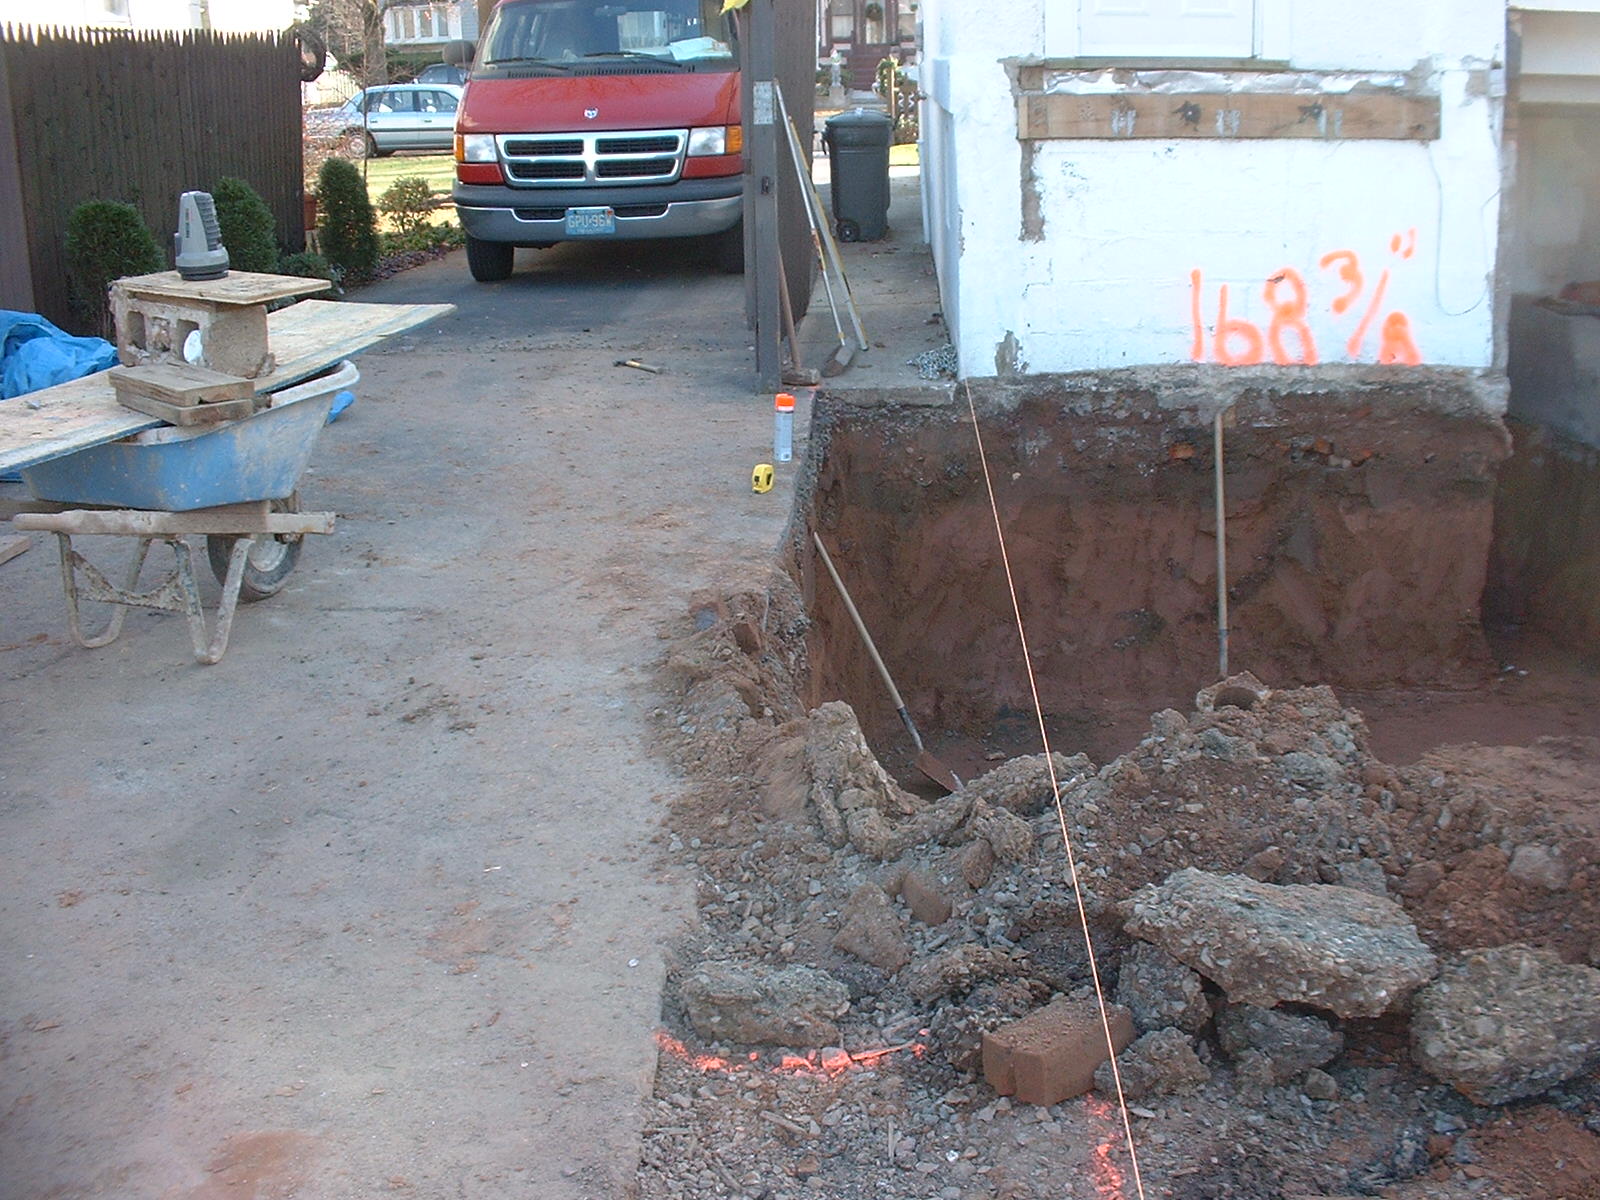 The hole for the basement is almost finished now. Just a few more hours of daylight to go!